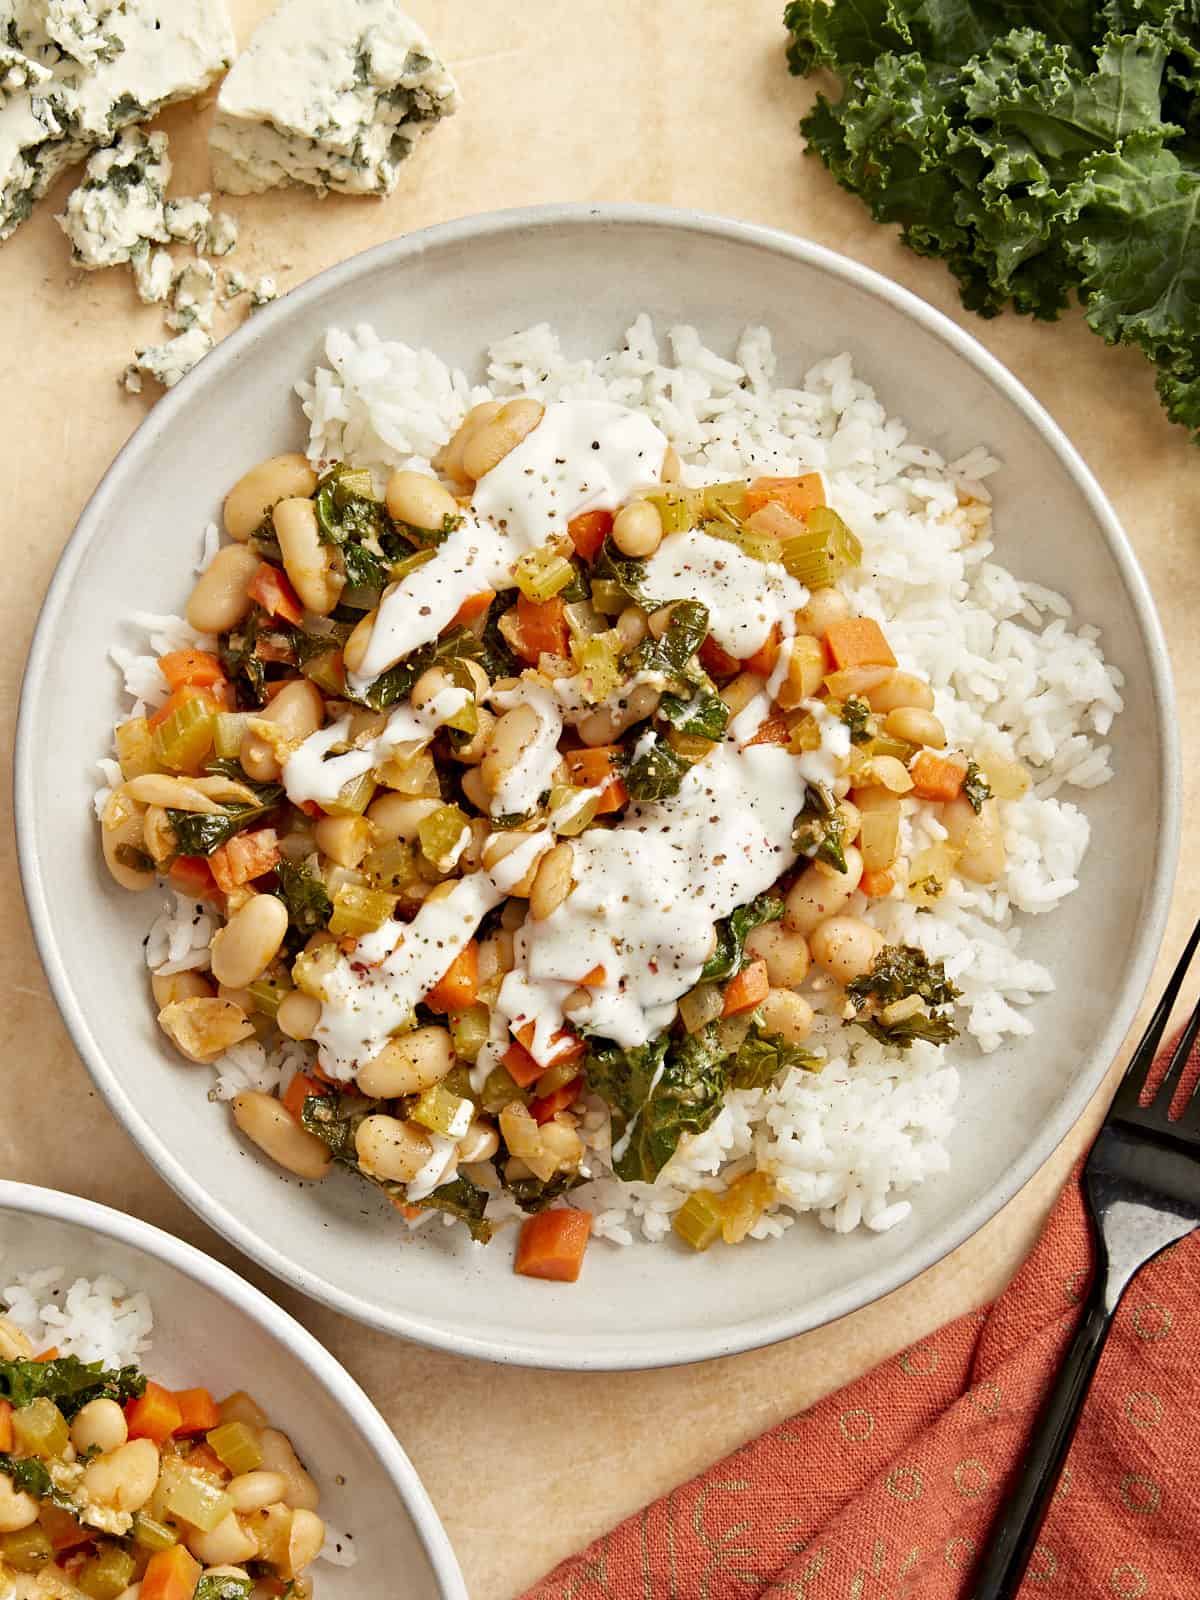 Top view of buffalo beans and vegetables over white rice on a white plate with white sauce drizzled on top.